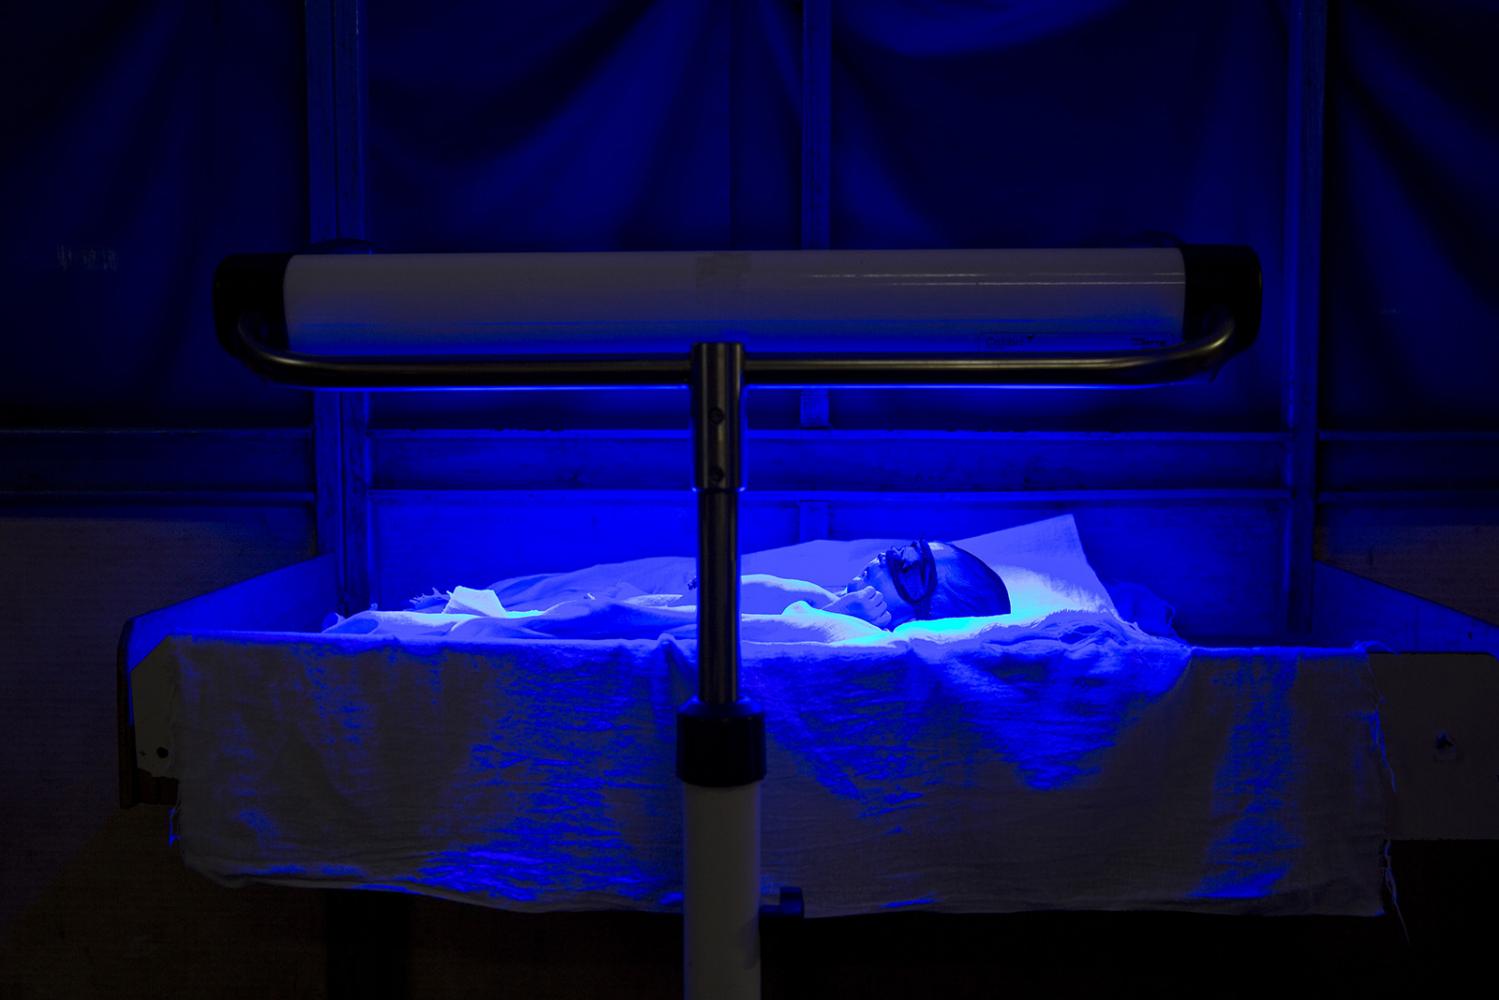 Image from NGO/DEVELOPMENT - A premature baby receives UV treatment to treat his...